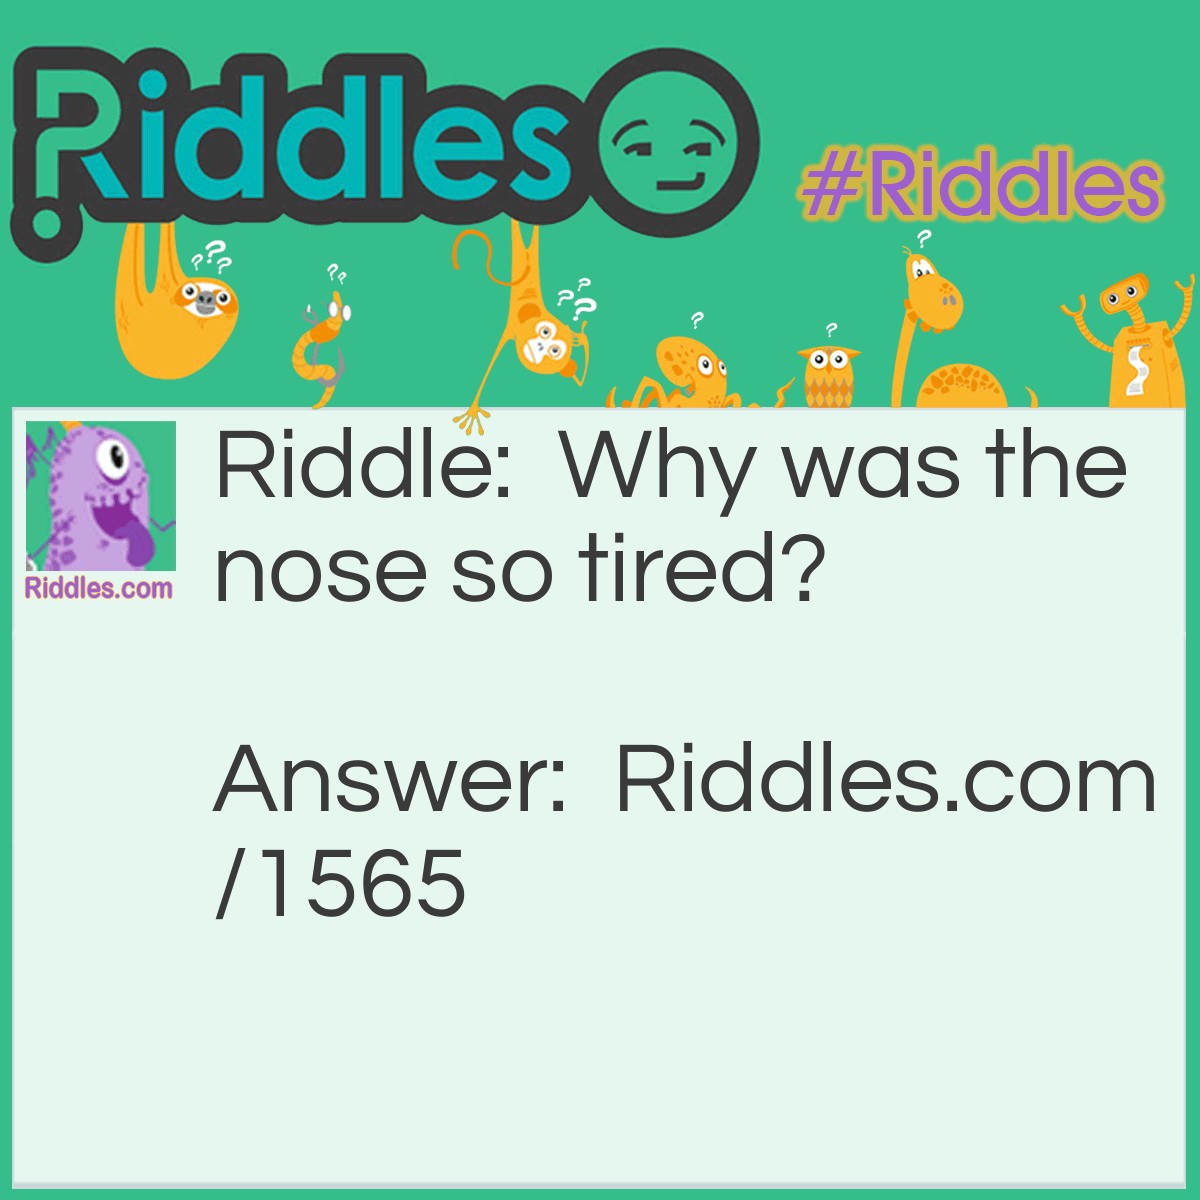 Riddle: Why was the nose so tired? Answer: Because it had been running all day.